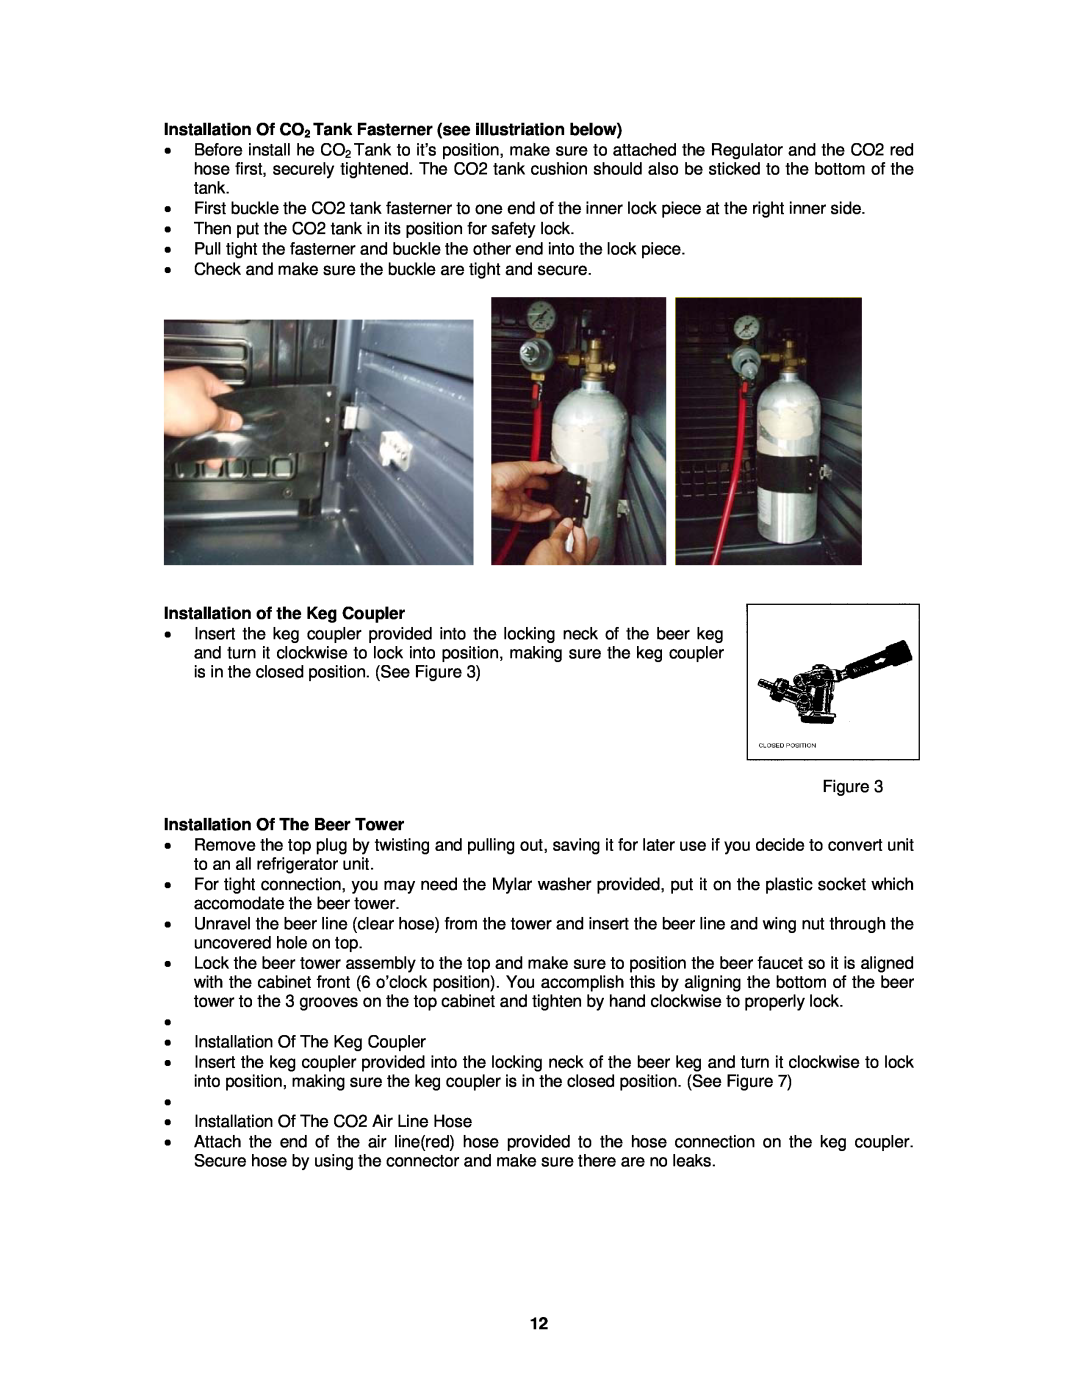 Avanti BD7000 instruction manual Installation of the Keg Coupler, Installation Of The Beer Tower 